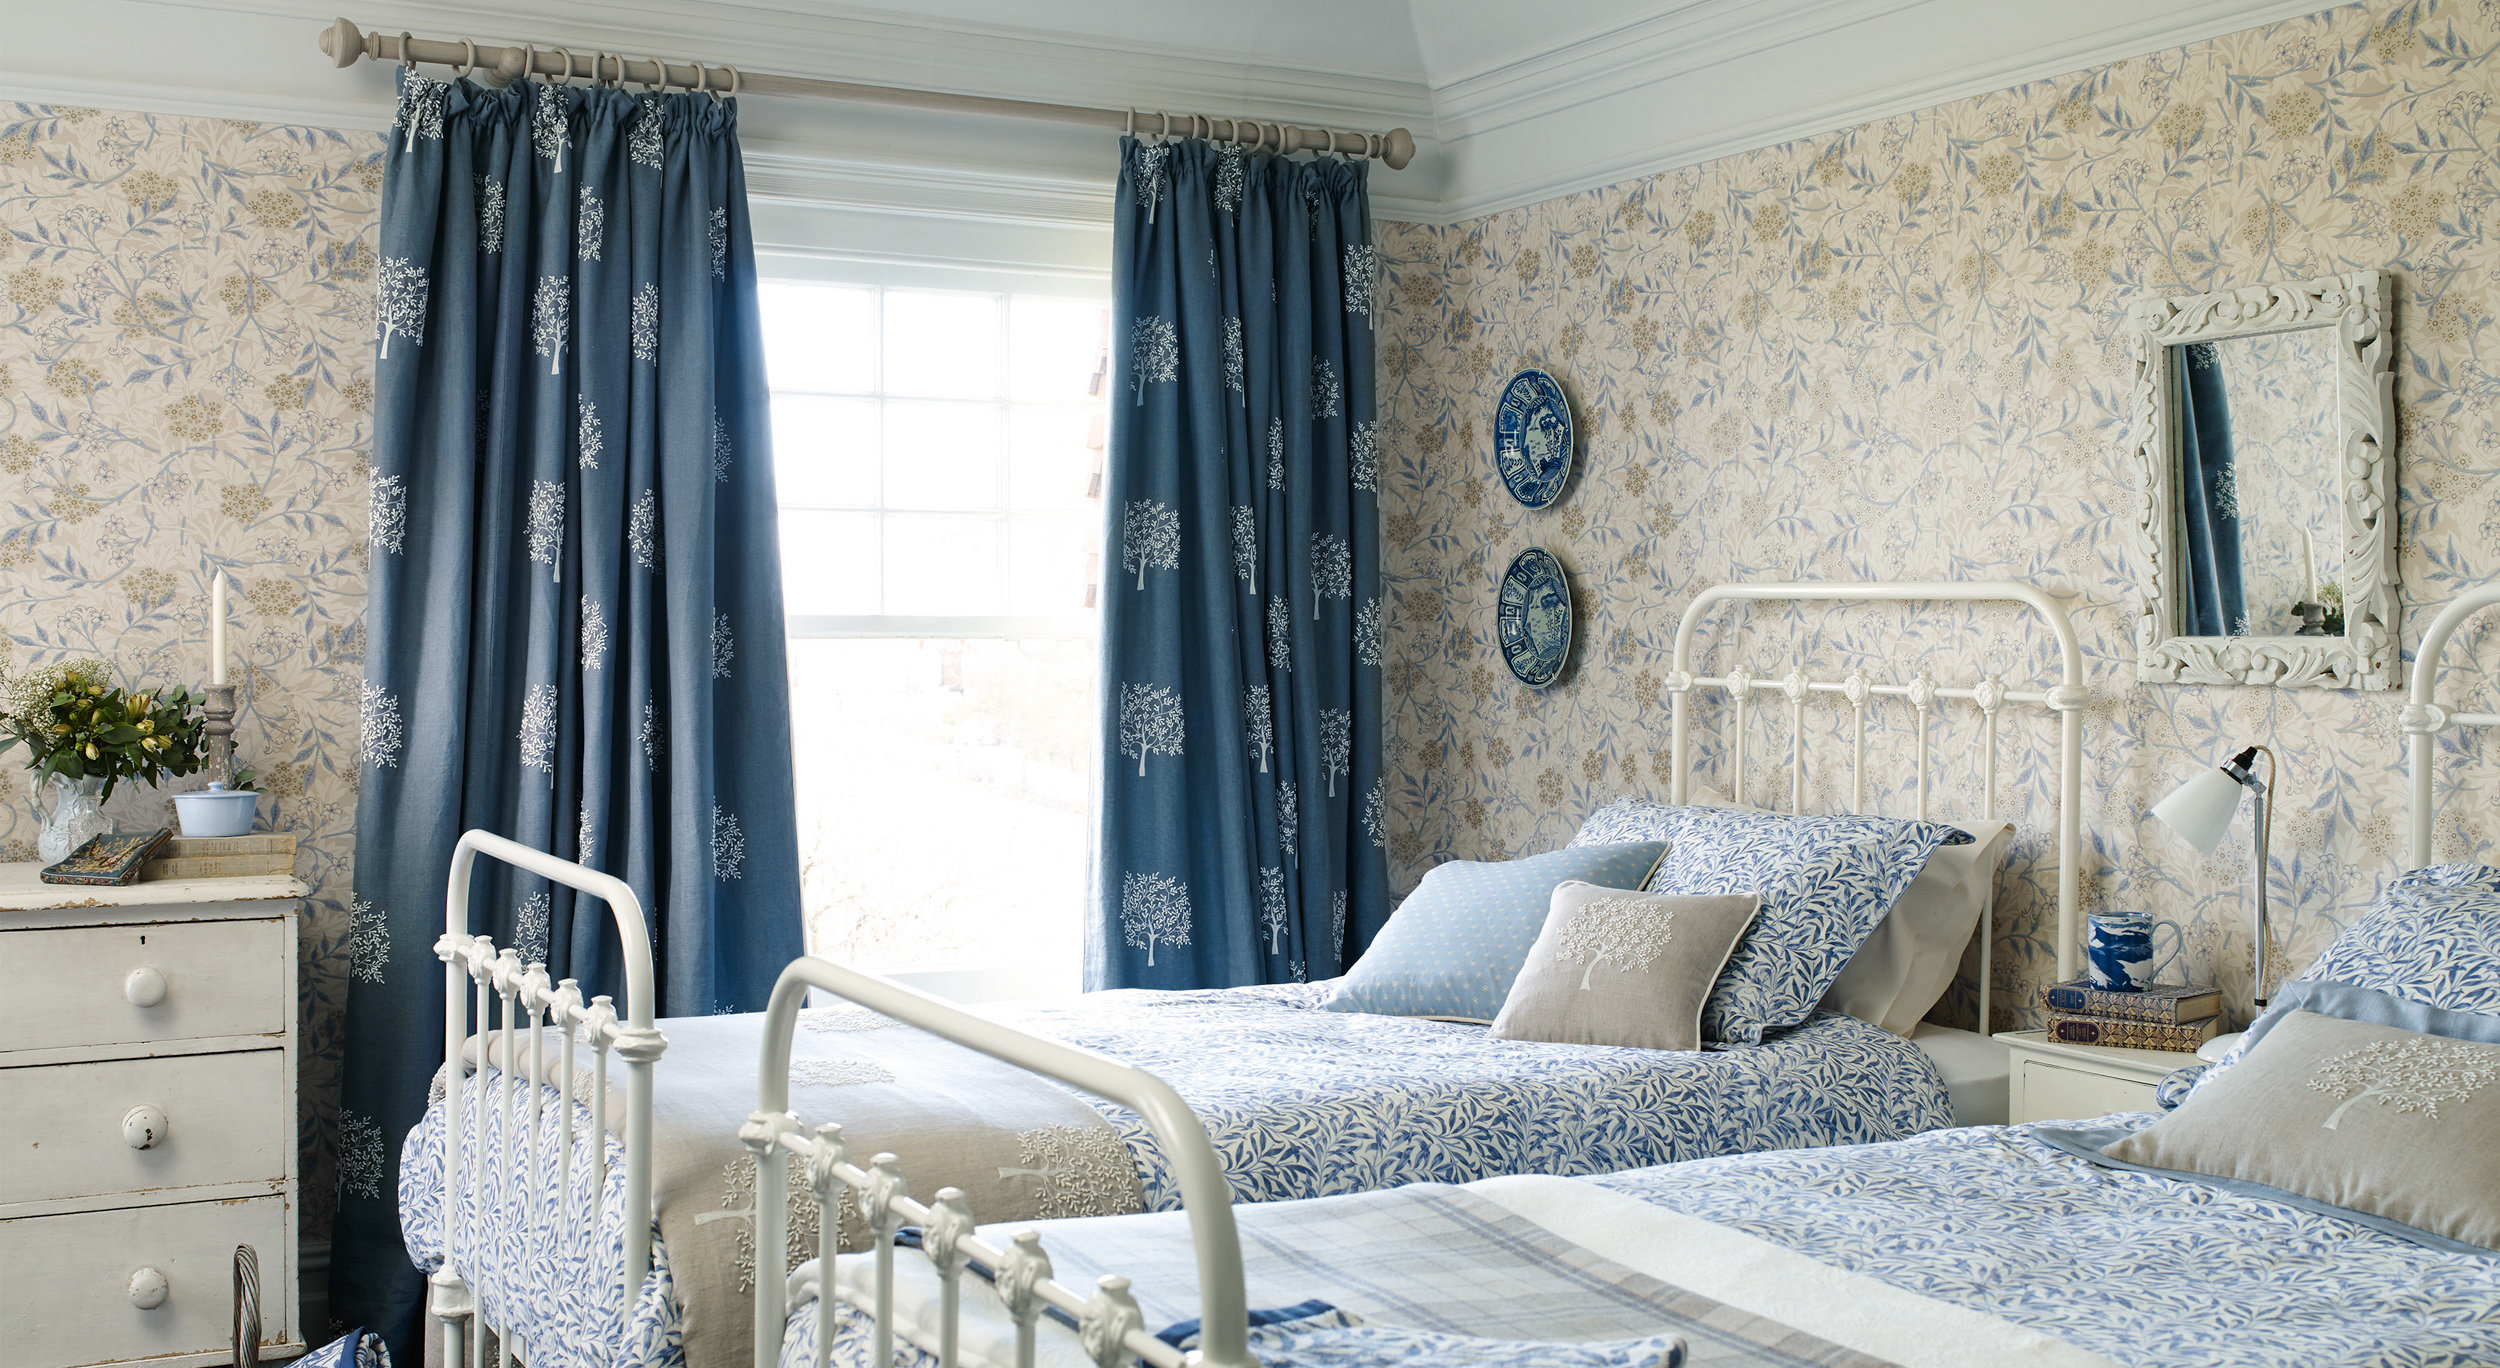 Bespoke made-to-measure curtains from a wide range of designer suppliers